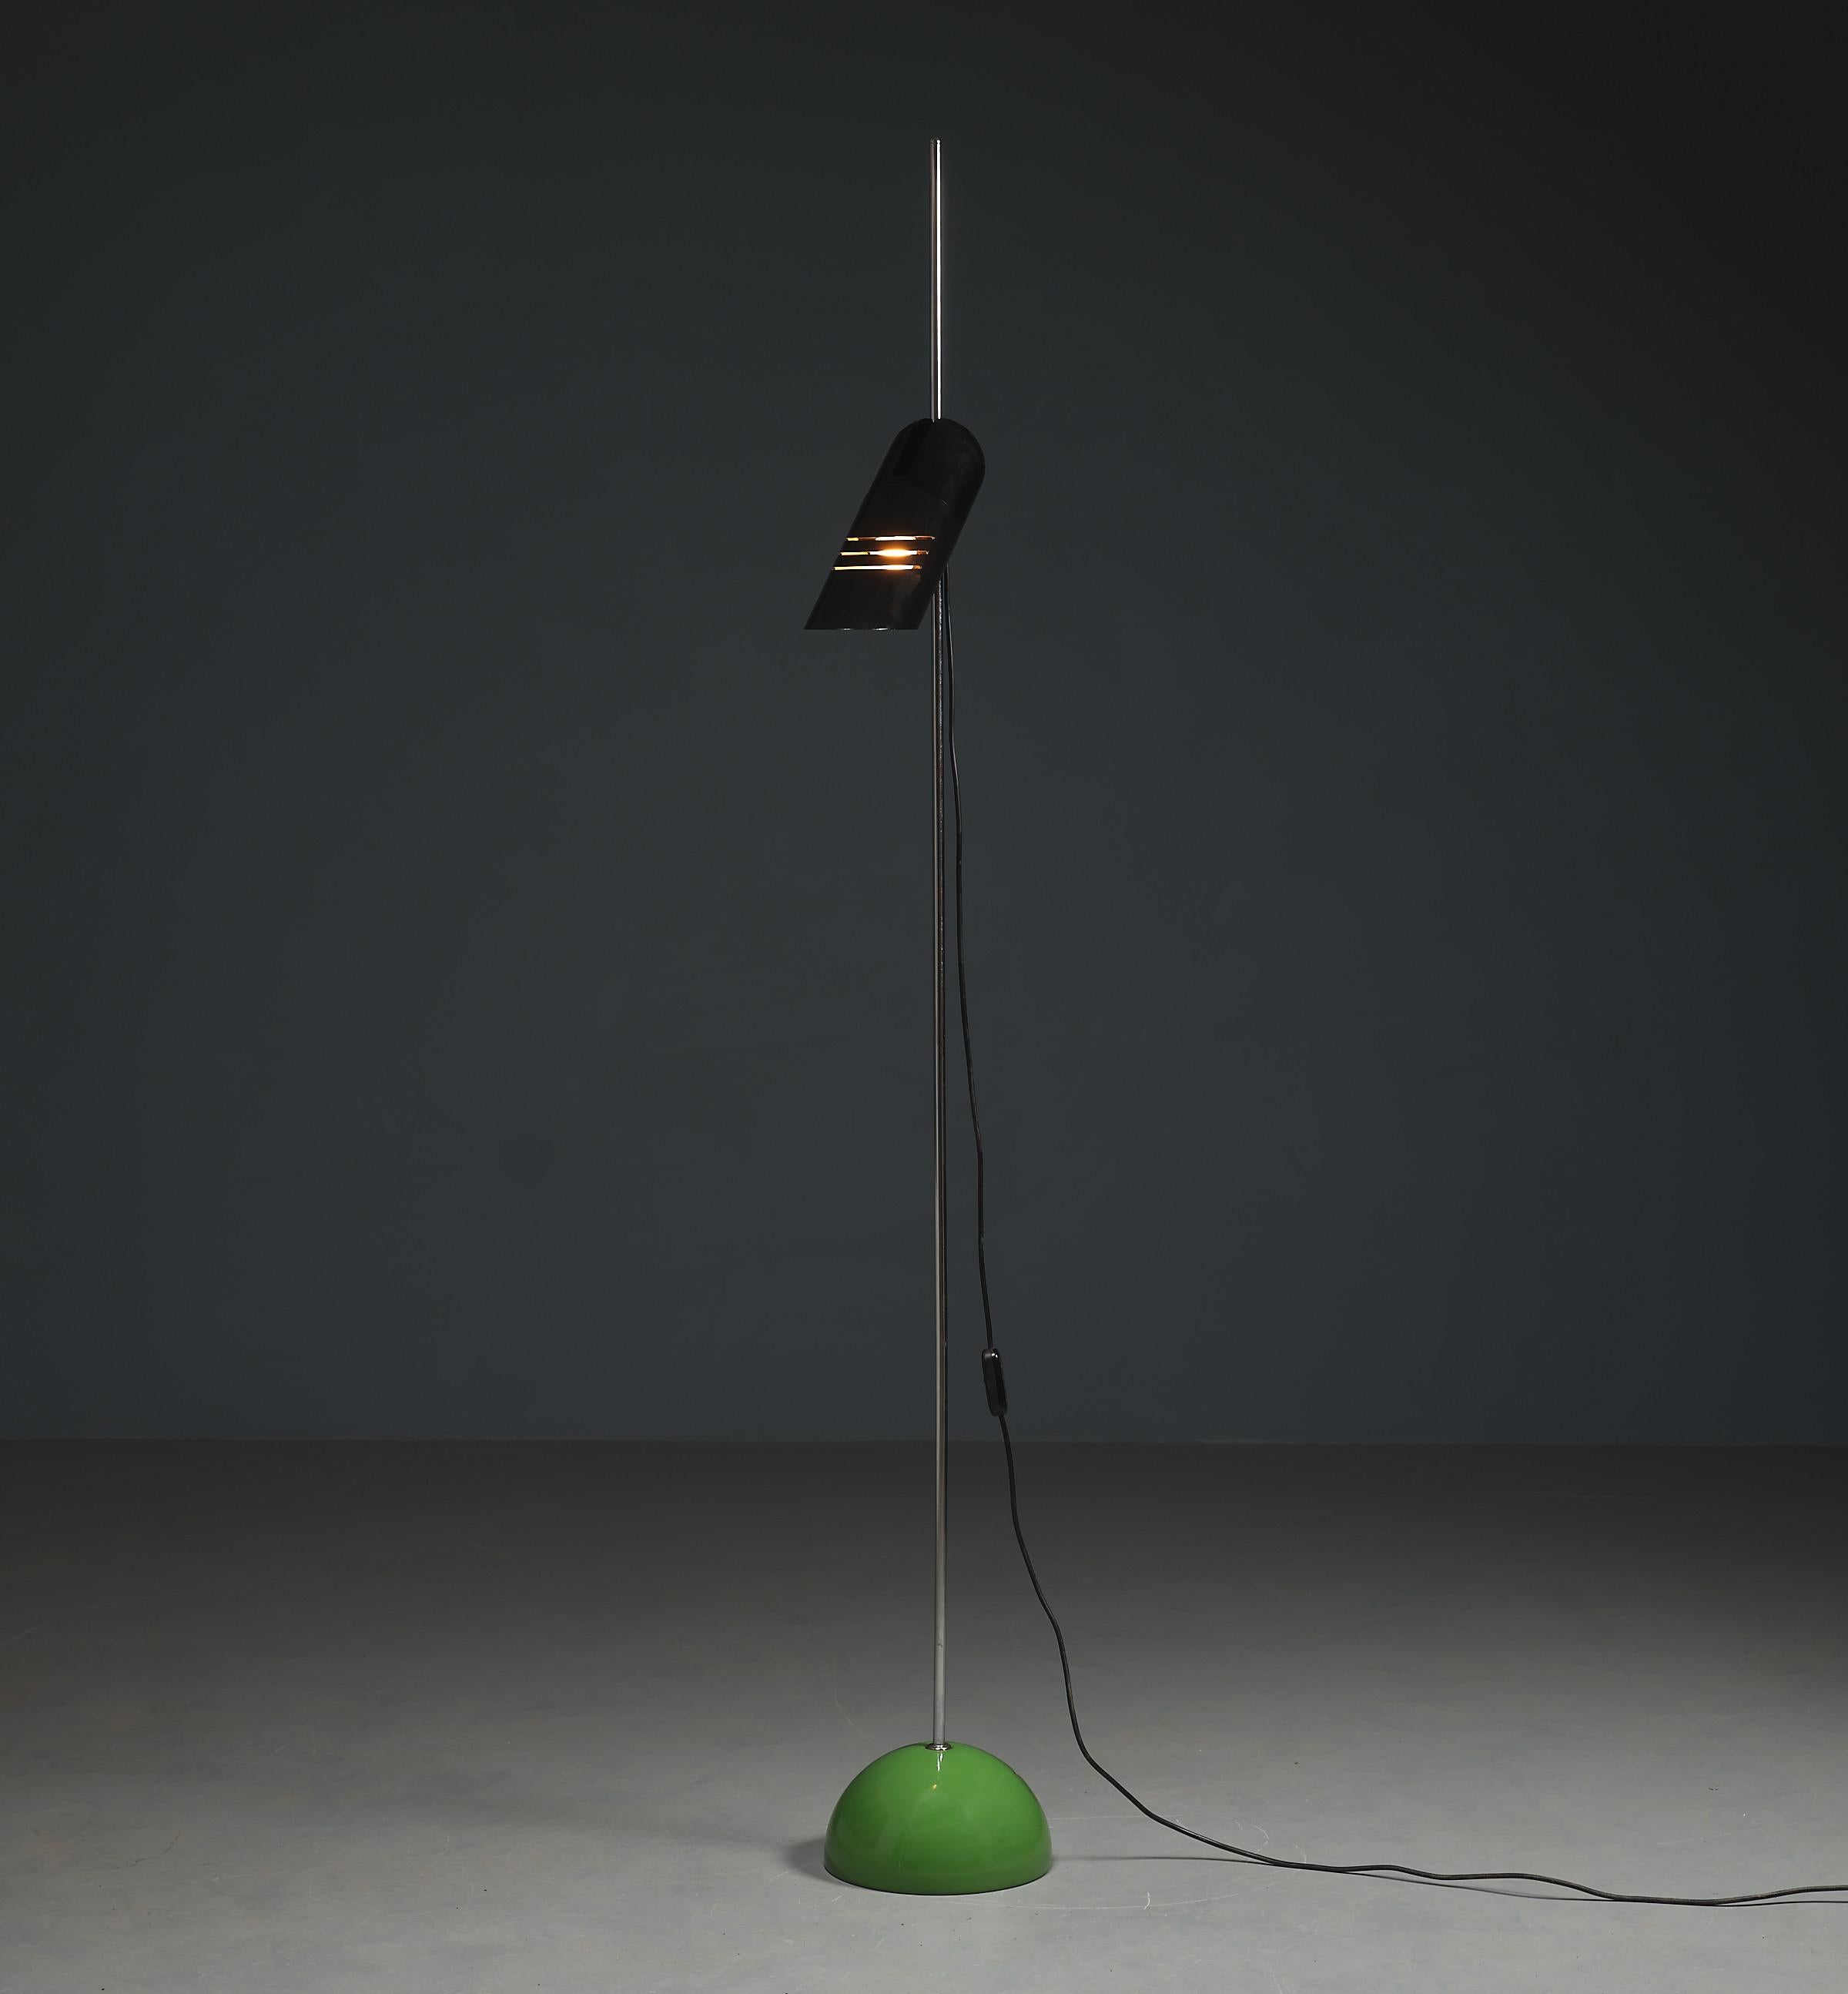 This striking 1970s floor lamp, with its modern Italian design, embodies the essence of vintage midcentury aesthetics. Crafted from a blend of chrome-plated steel, green lacquered steel, black lacquered aluminum, and polystyrene, it stands as an